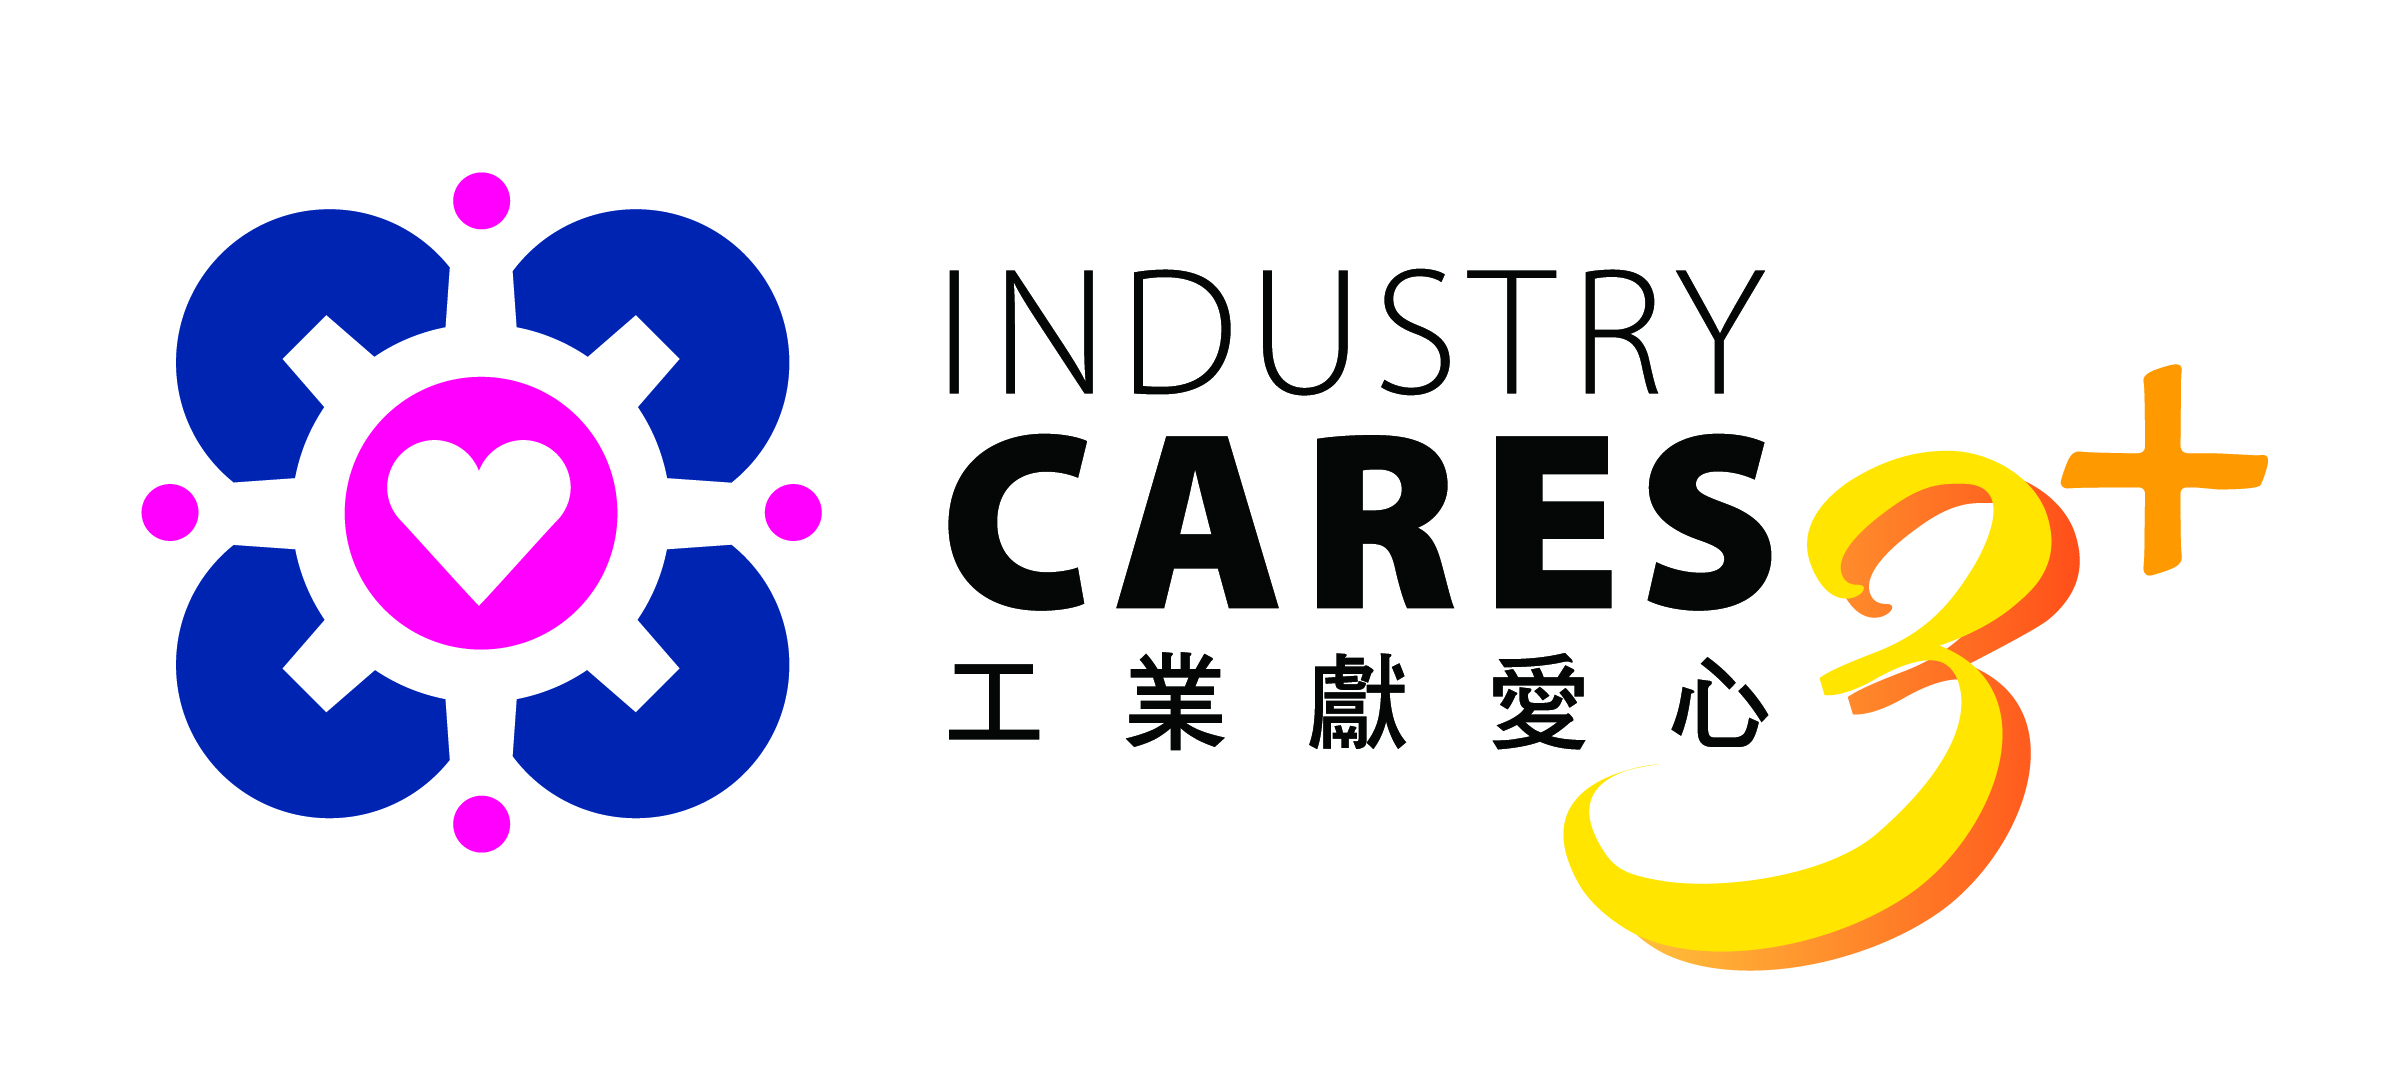 3Year Award Enterprise Group of Industry Cares 2020